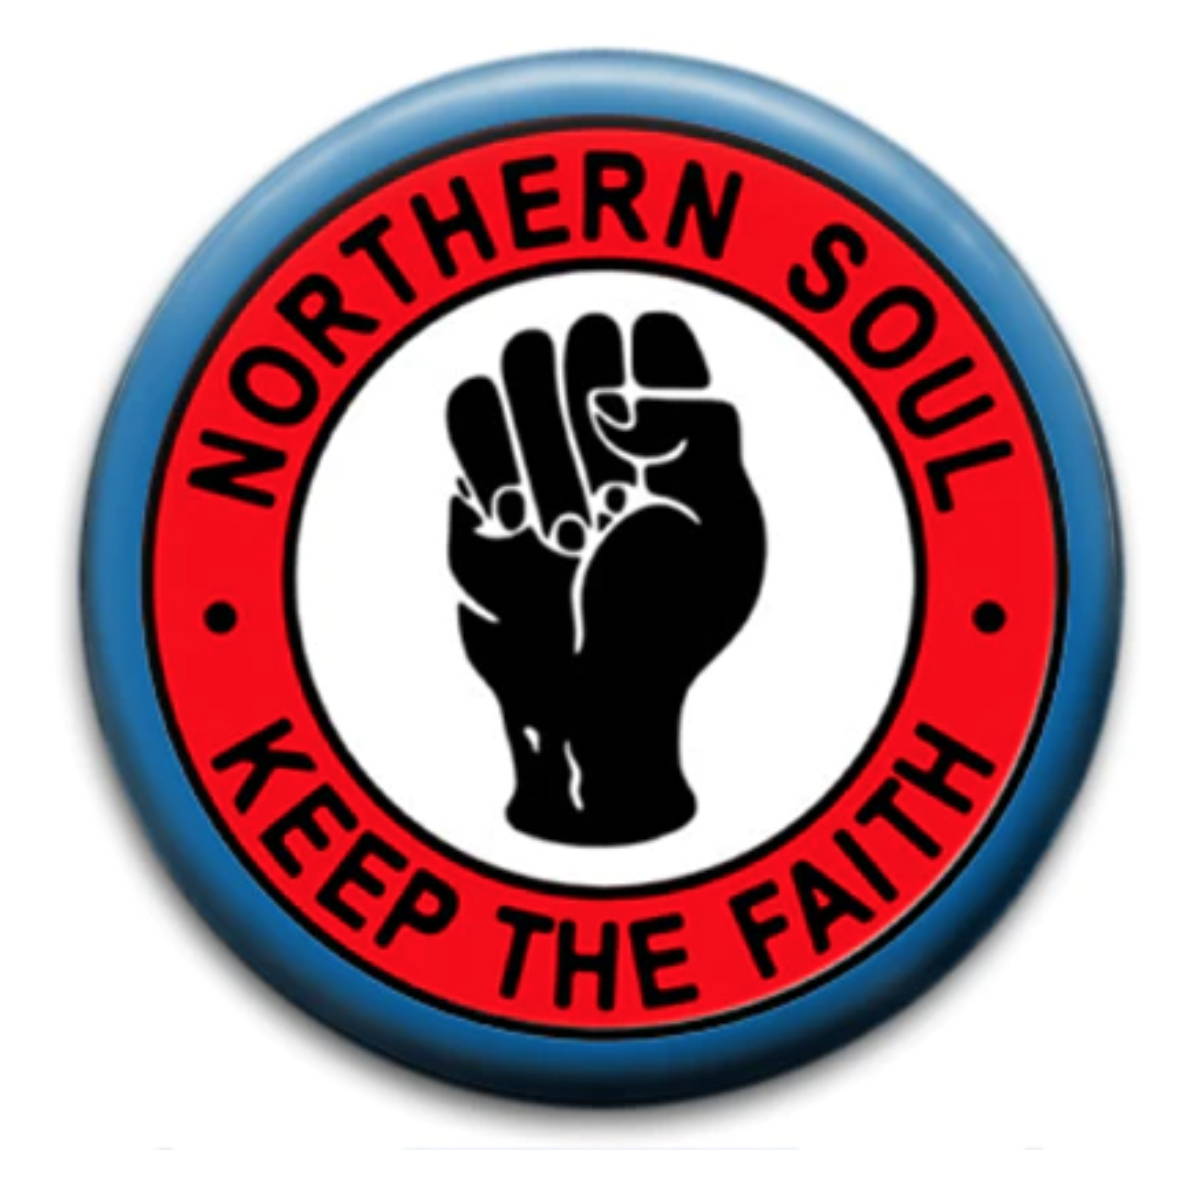 Northern Soul Badge stating "keep the faith" with a clenched fist, an icon for the Northern Soul genre